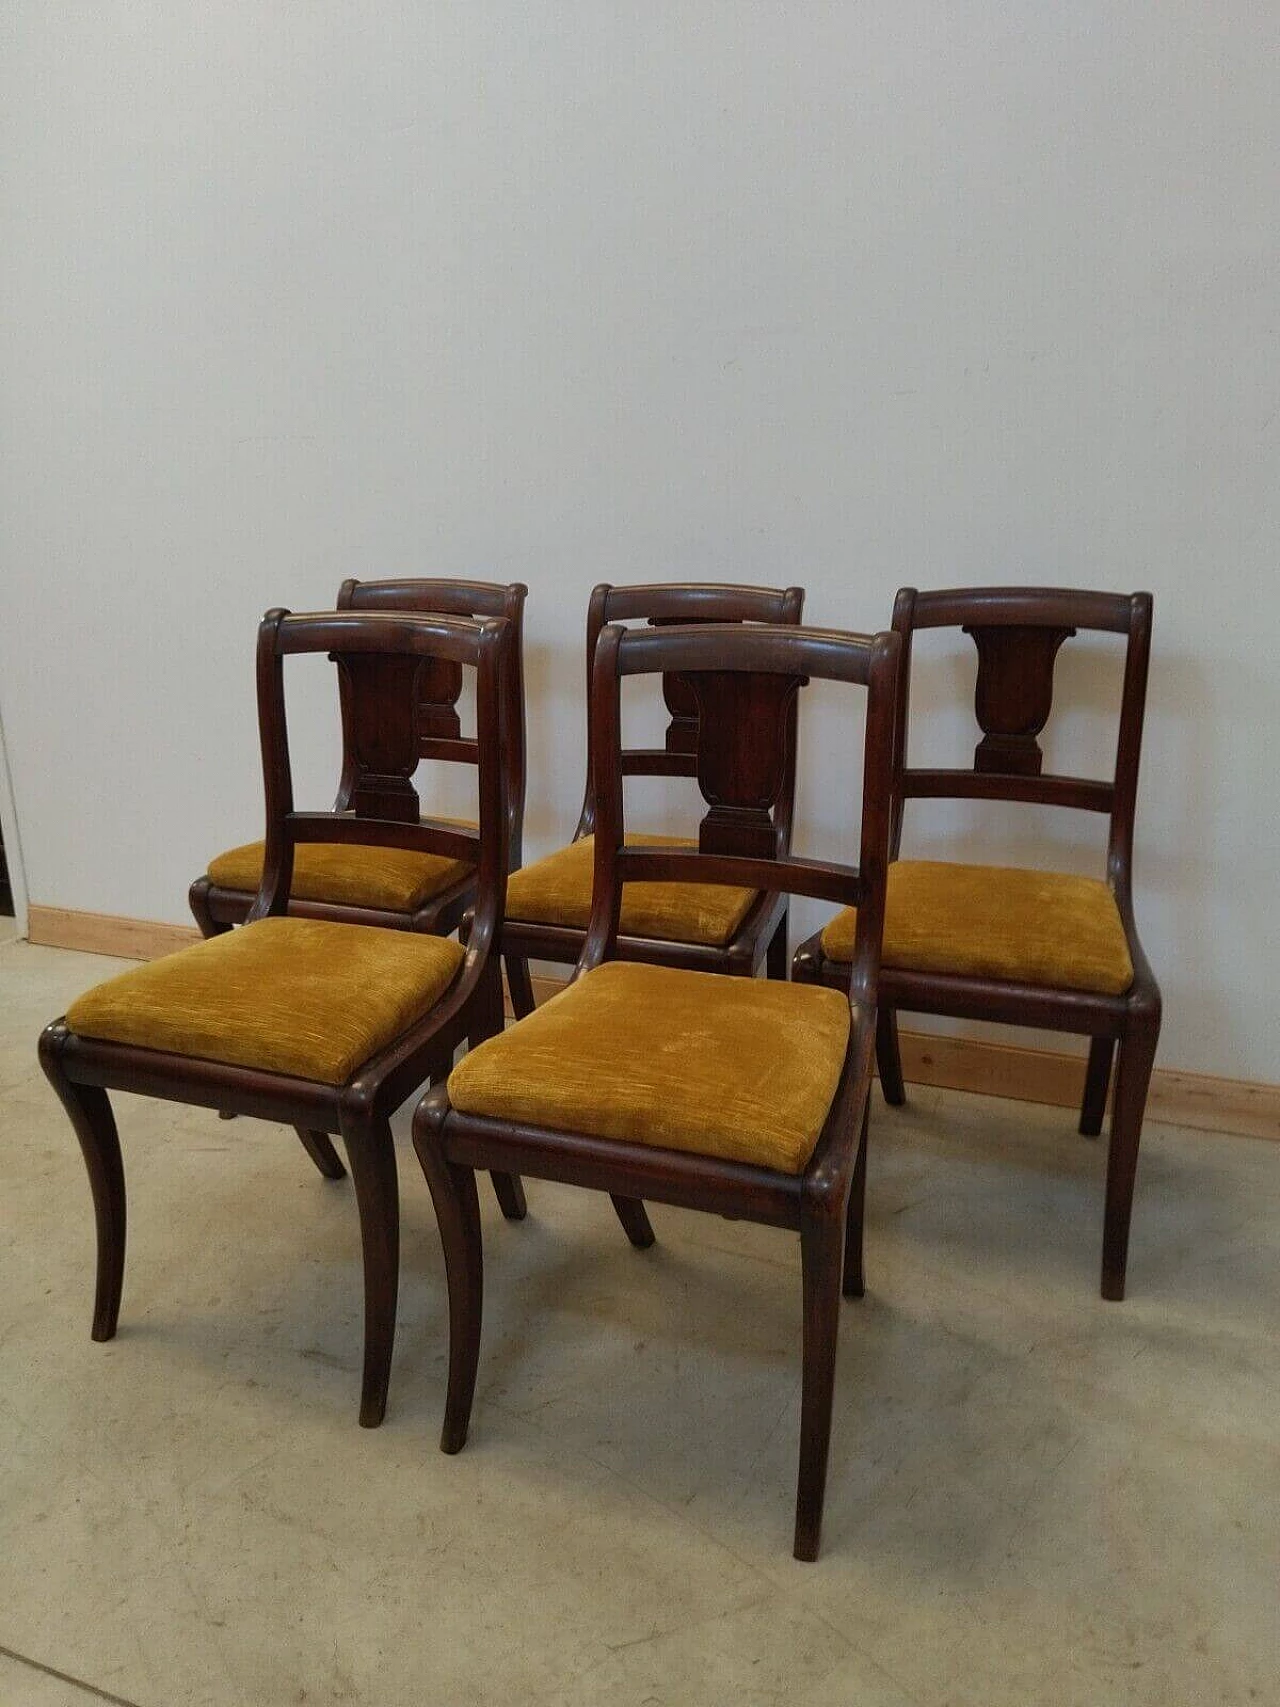 5 Empire-style walnut chairs, early 20th century 6